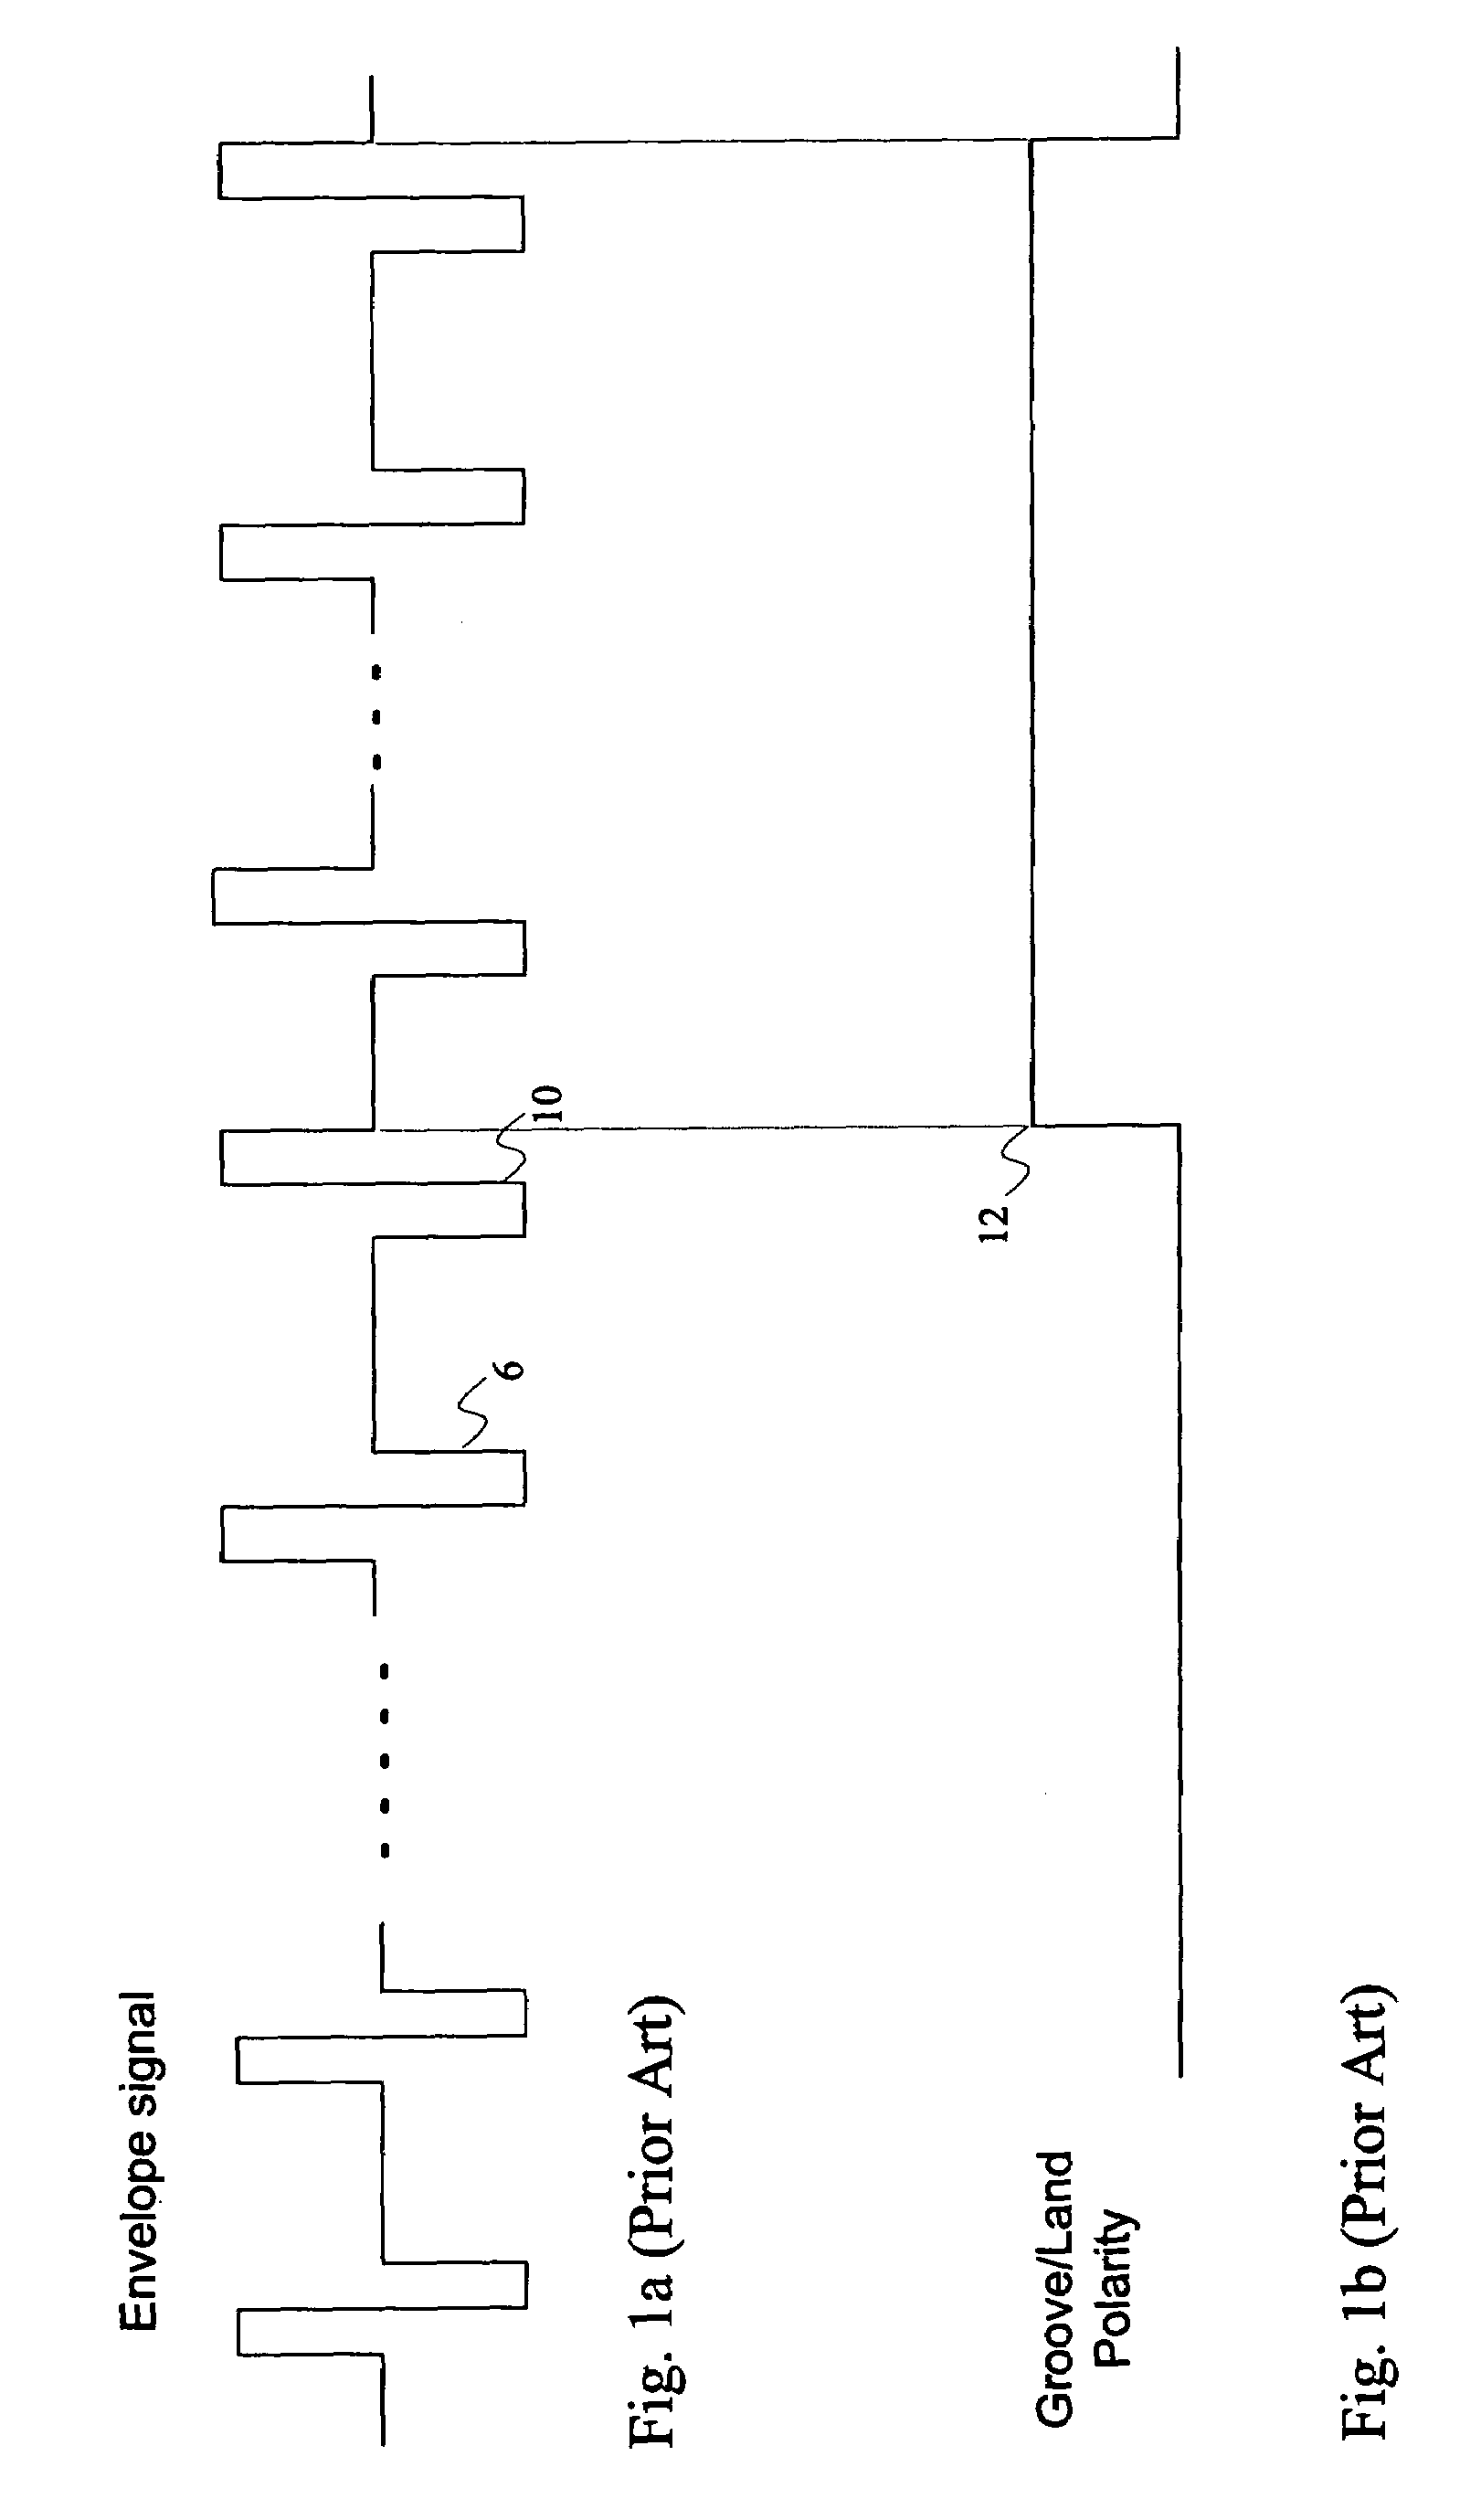 Apparatus and method for accurately converting groove/land polarity upon groove/land track change on optical medium